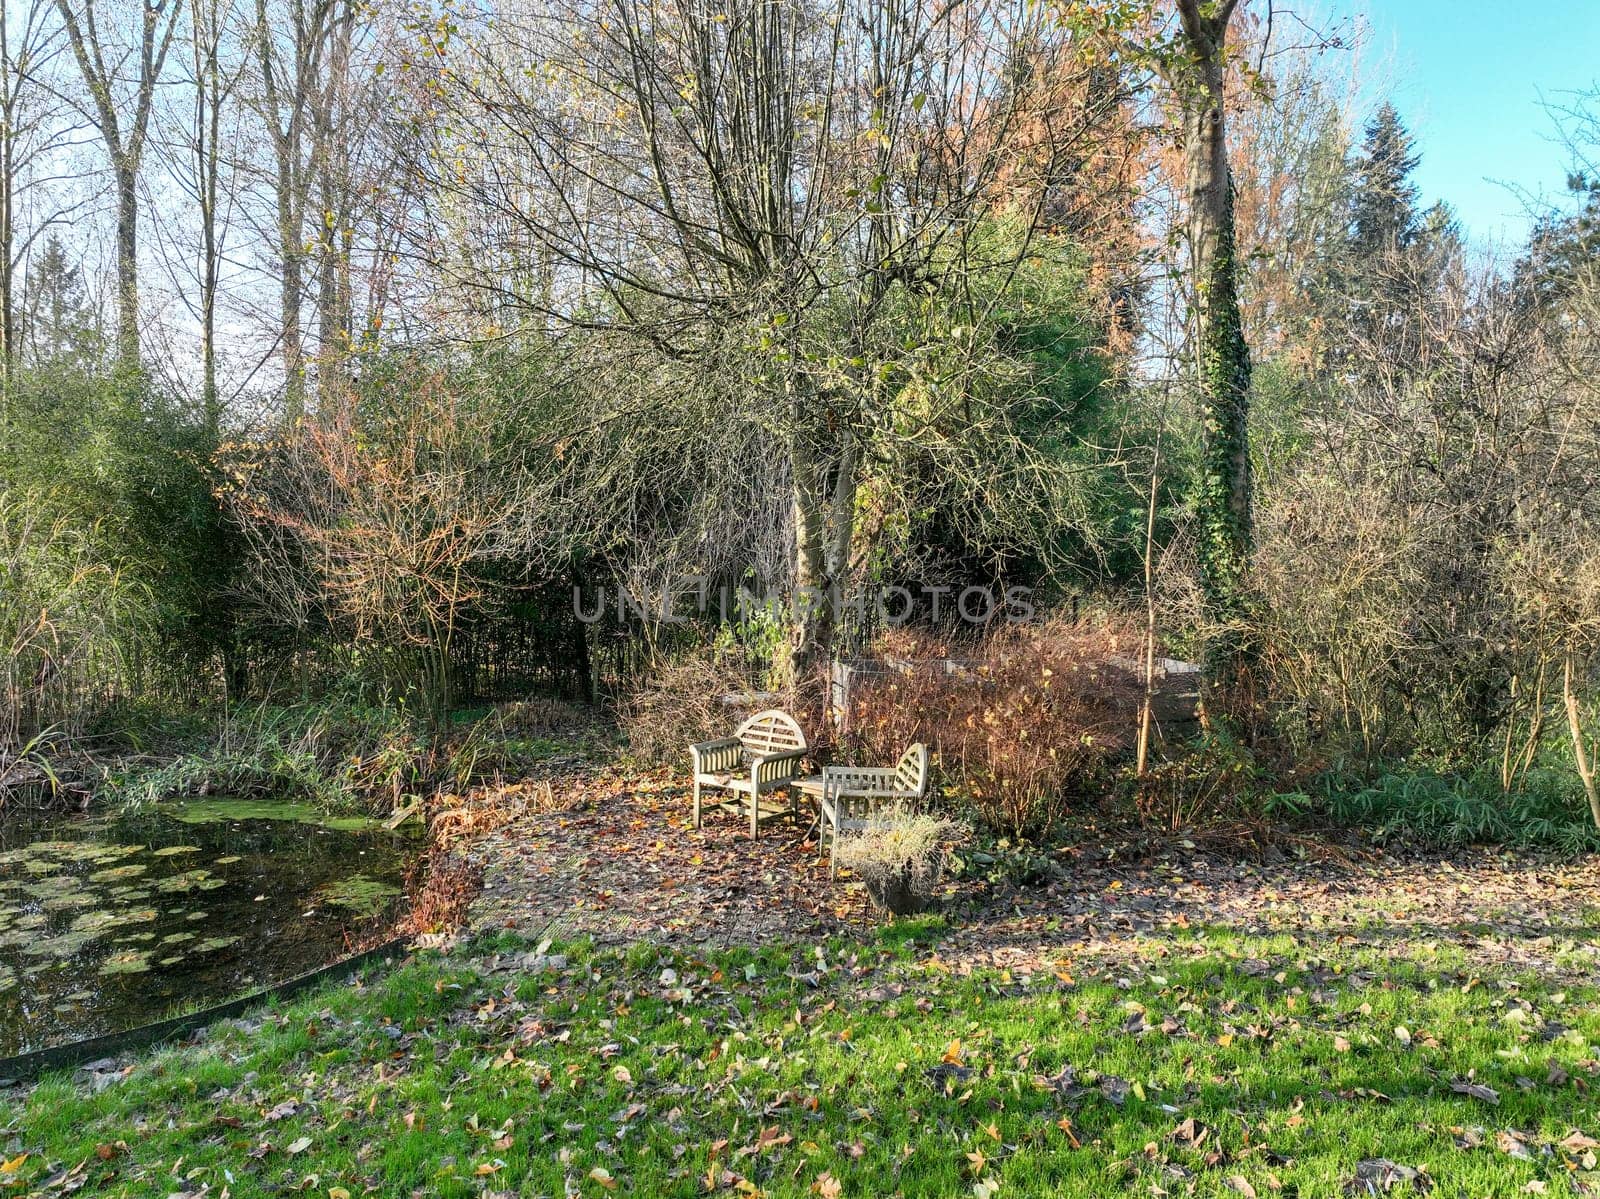 English green garden with water pound and multiple type of trees and plants during winter season